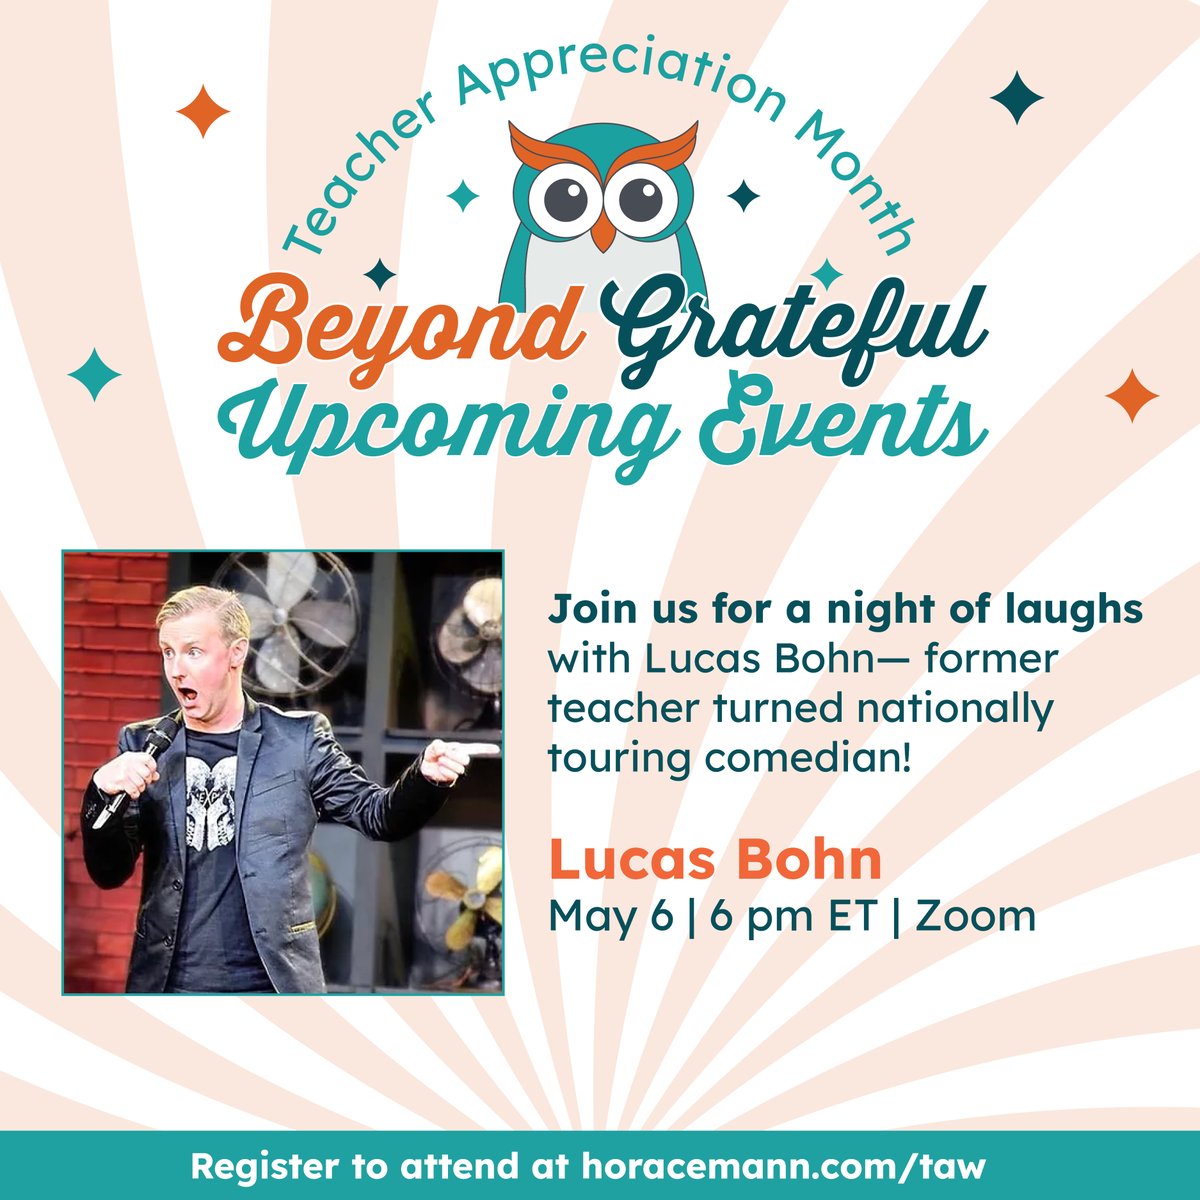 Join us for an entertaining night with comedian Lucas Bohn! This virtual event is completely FREE and will help you unwind with laughter. Register to attend here: ow.ly/UT9s50Rnuki We hope to see you there! #TeacherAppreciation #HMBeyondGrateful